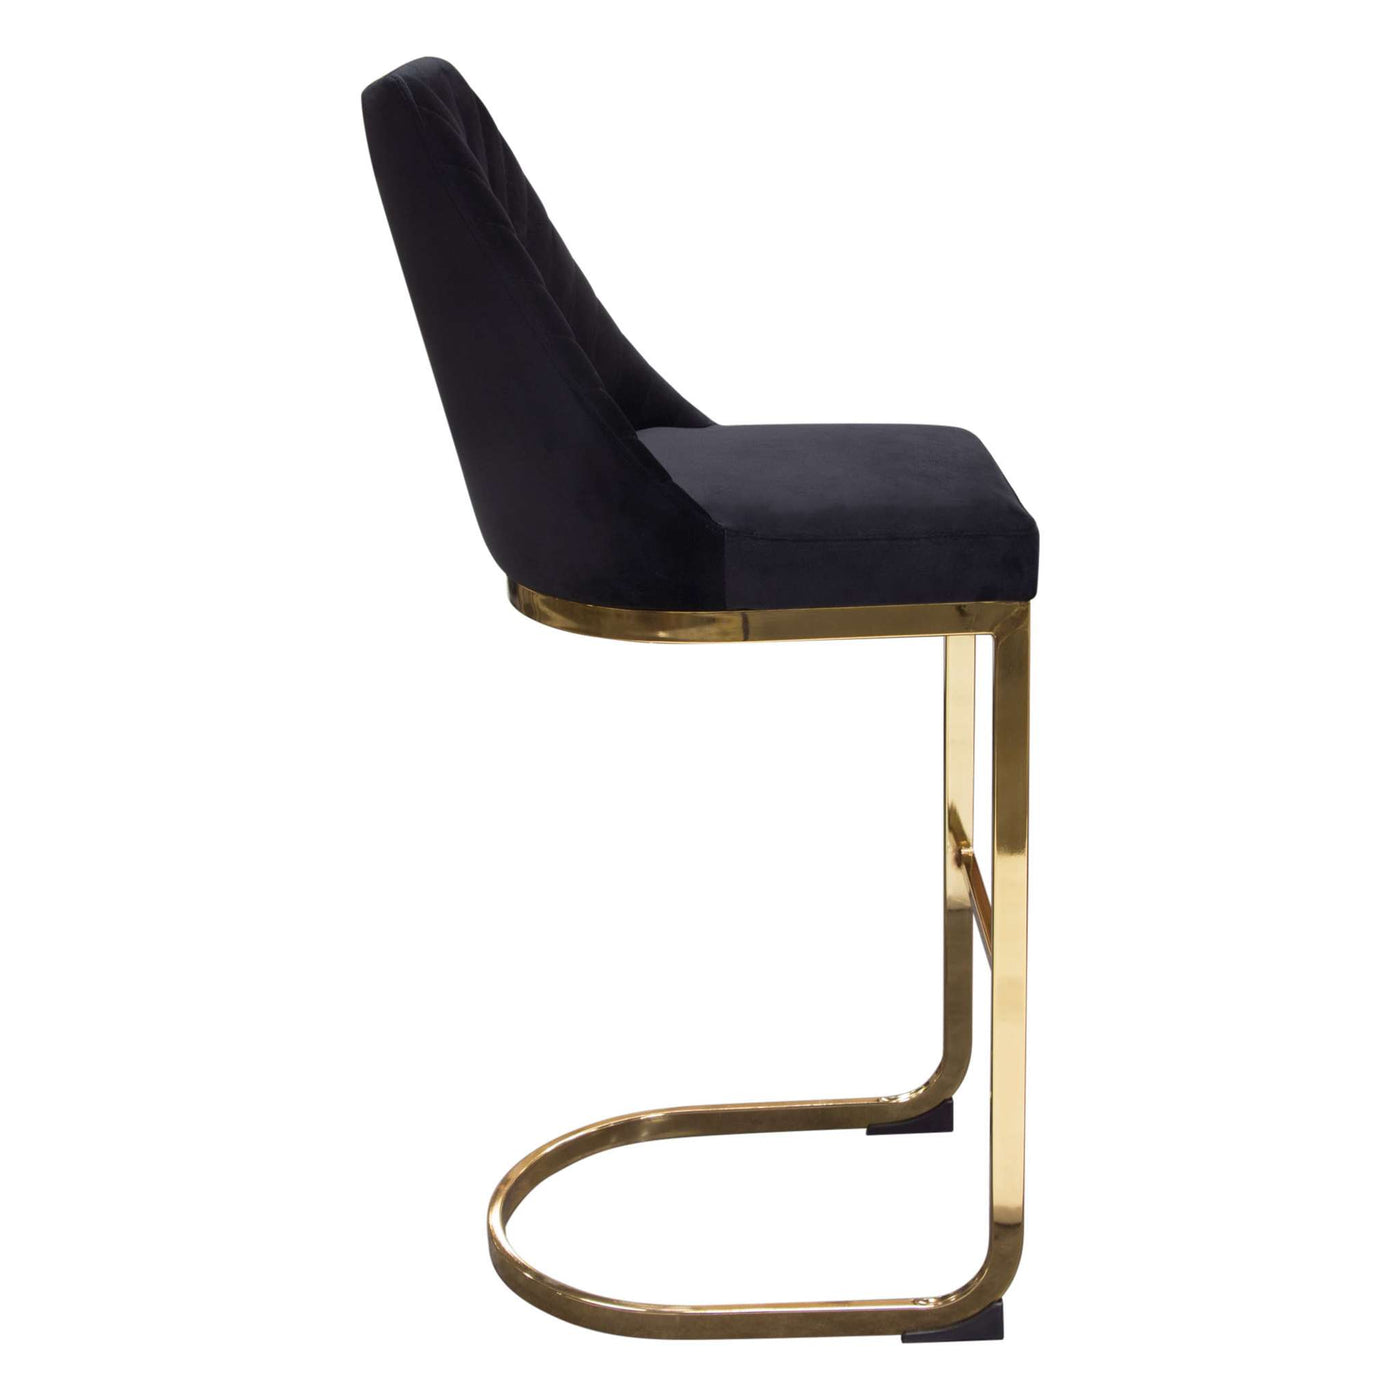 Vogue Set of (2) Bar Height Chairs with Polished Gold Metal Base by Diamond Sofa